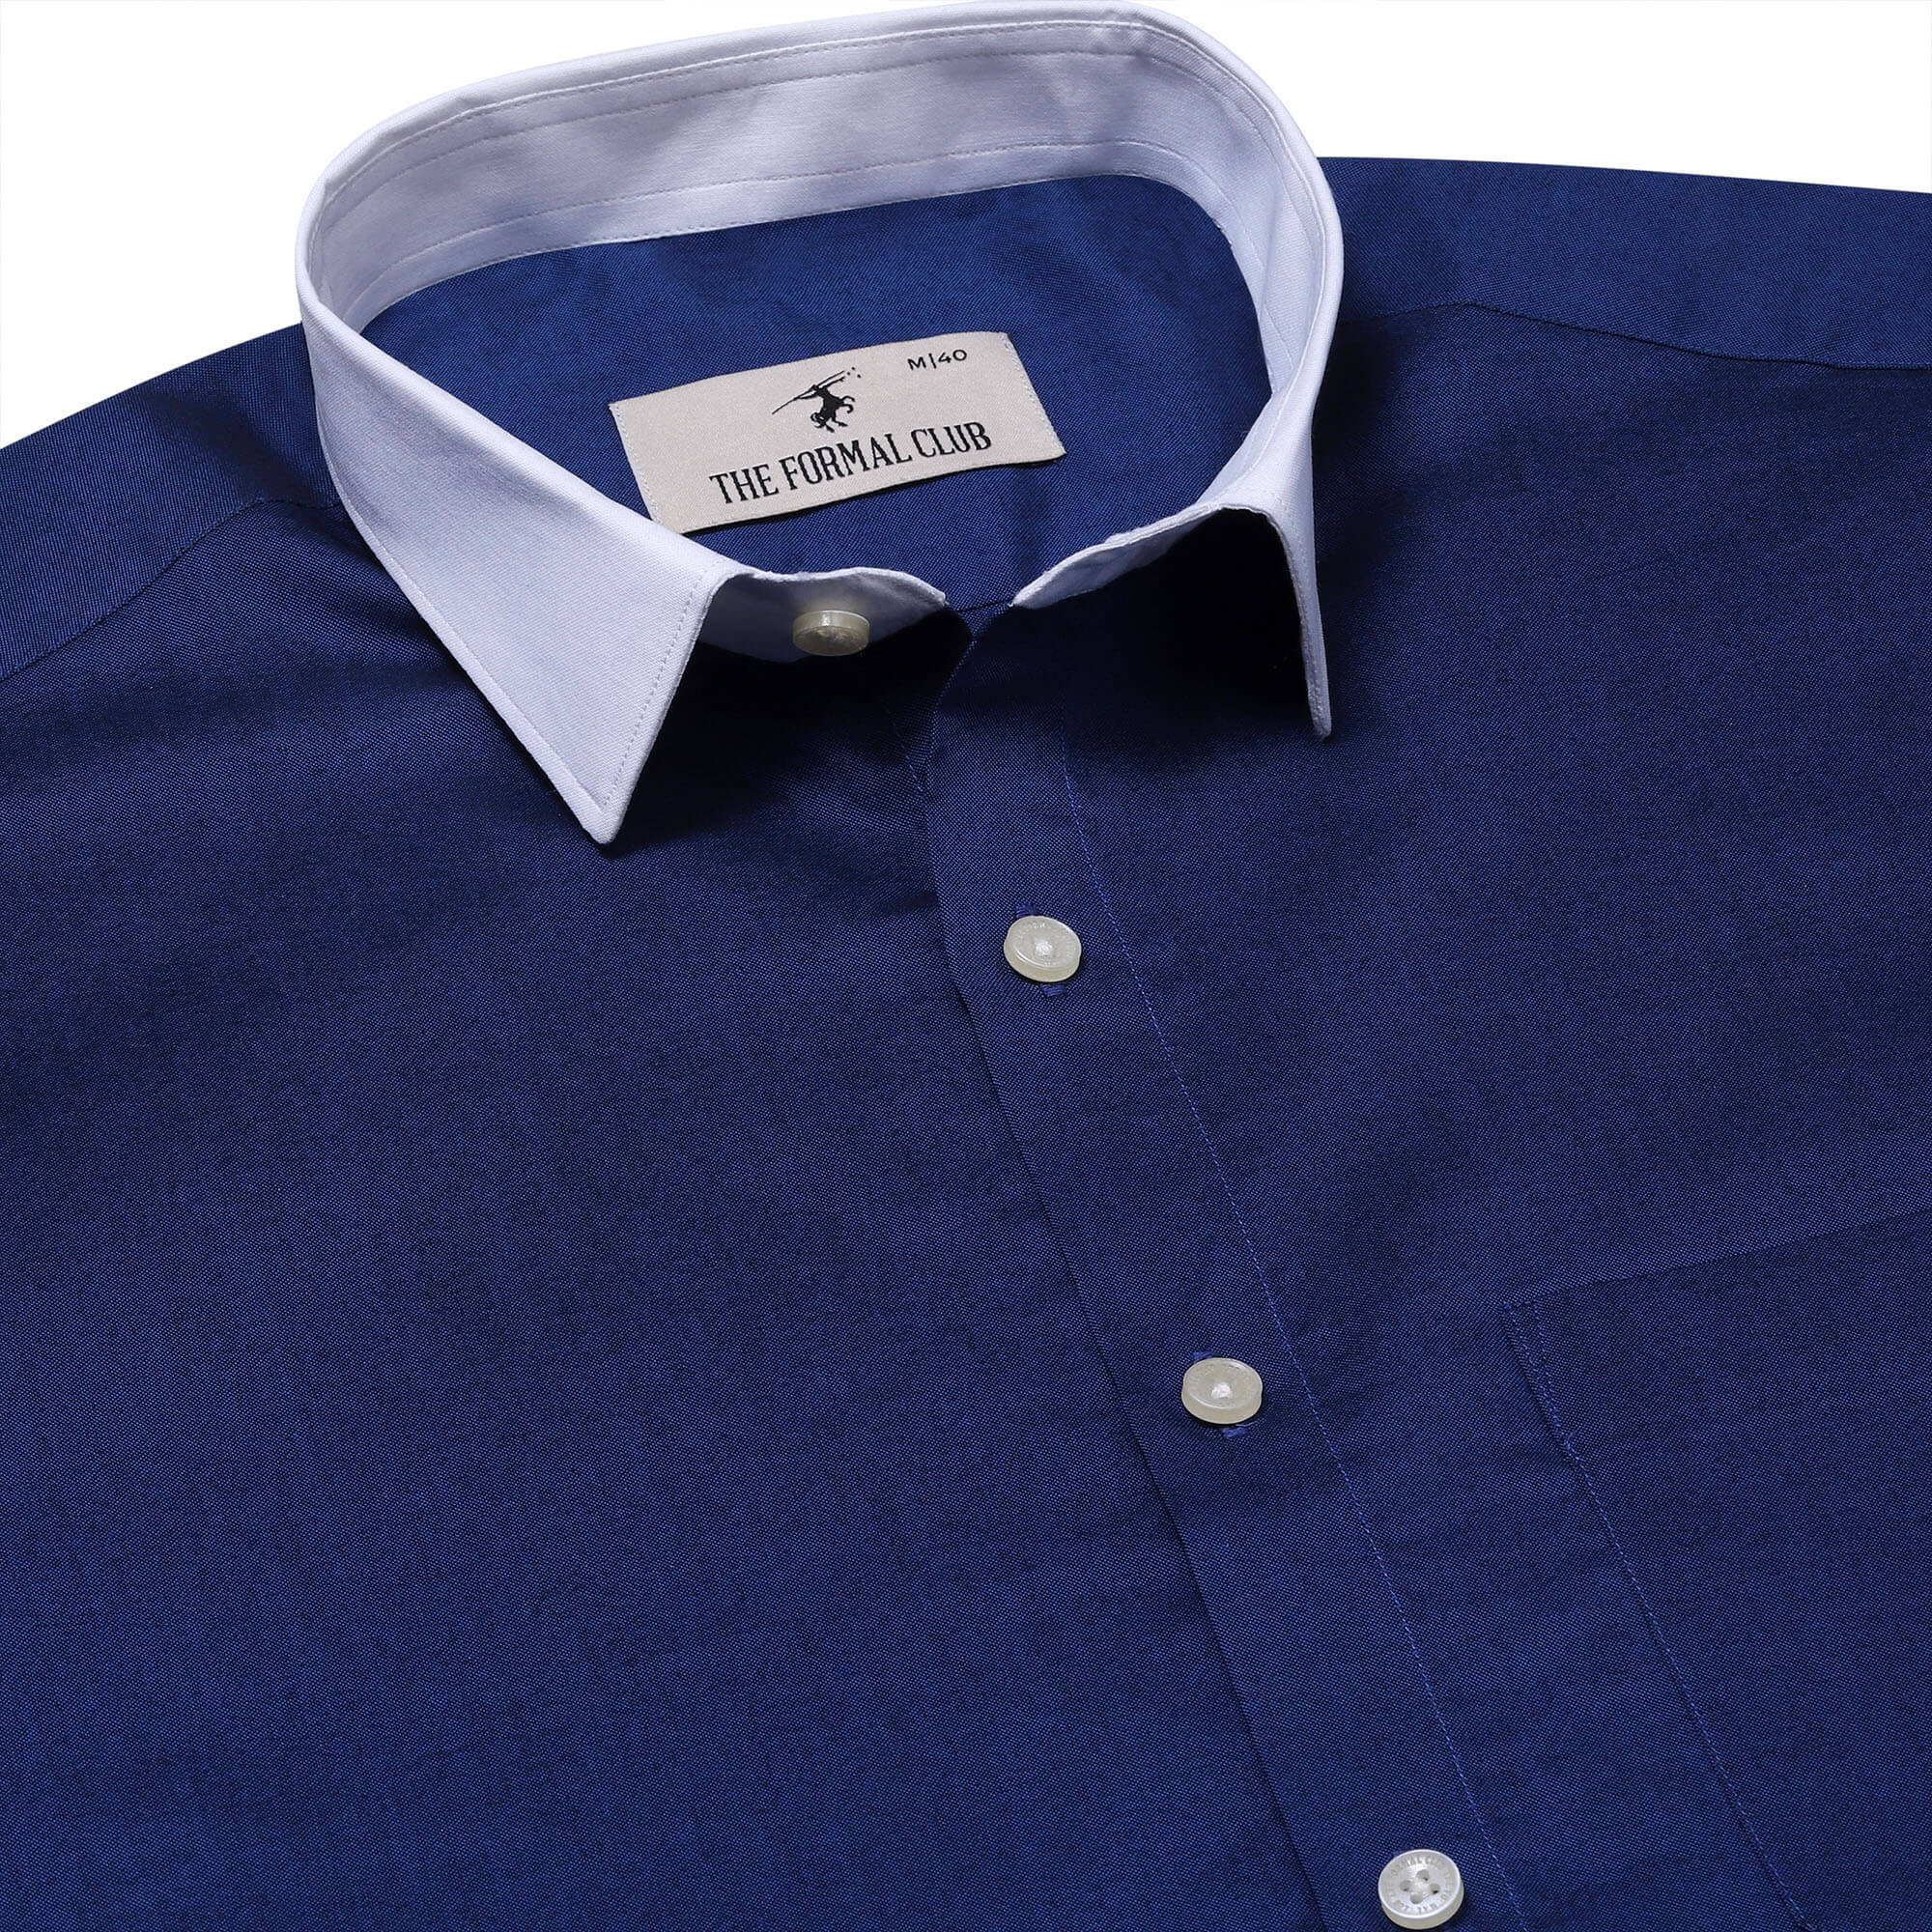 White Collar Solid Shirt In Navy Blue - The Formal Club